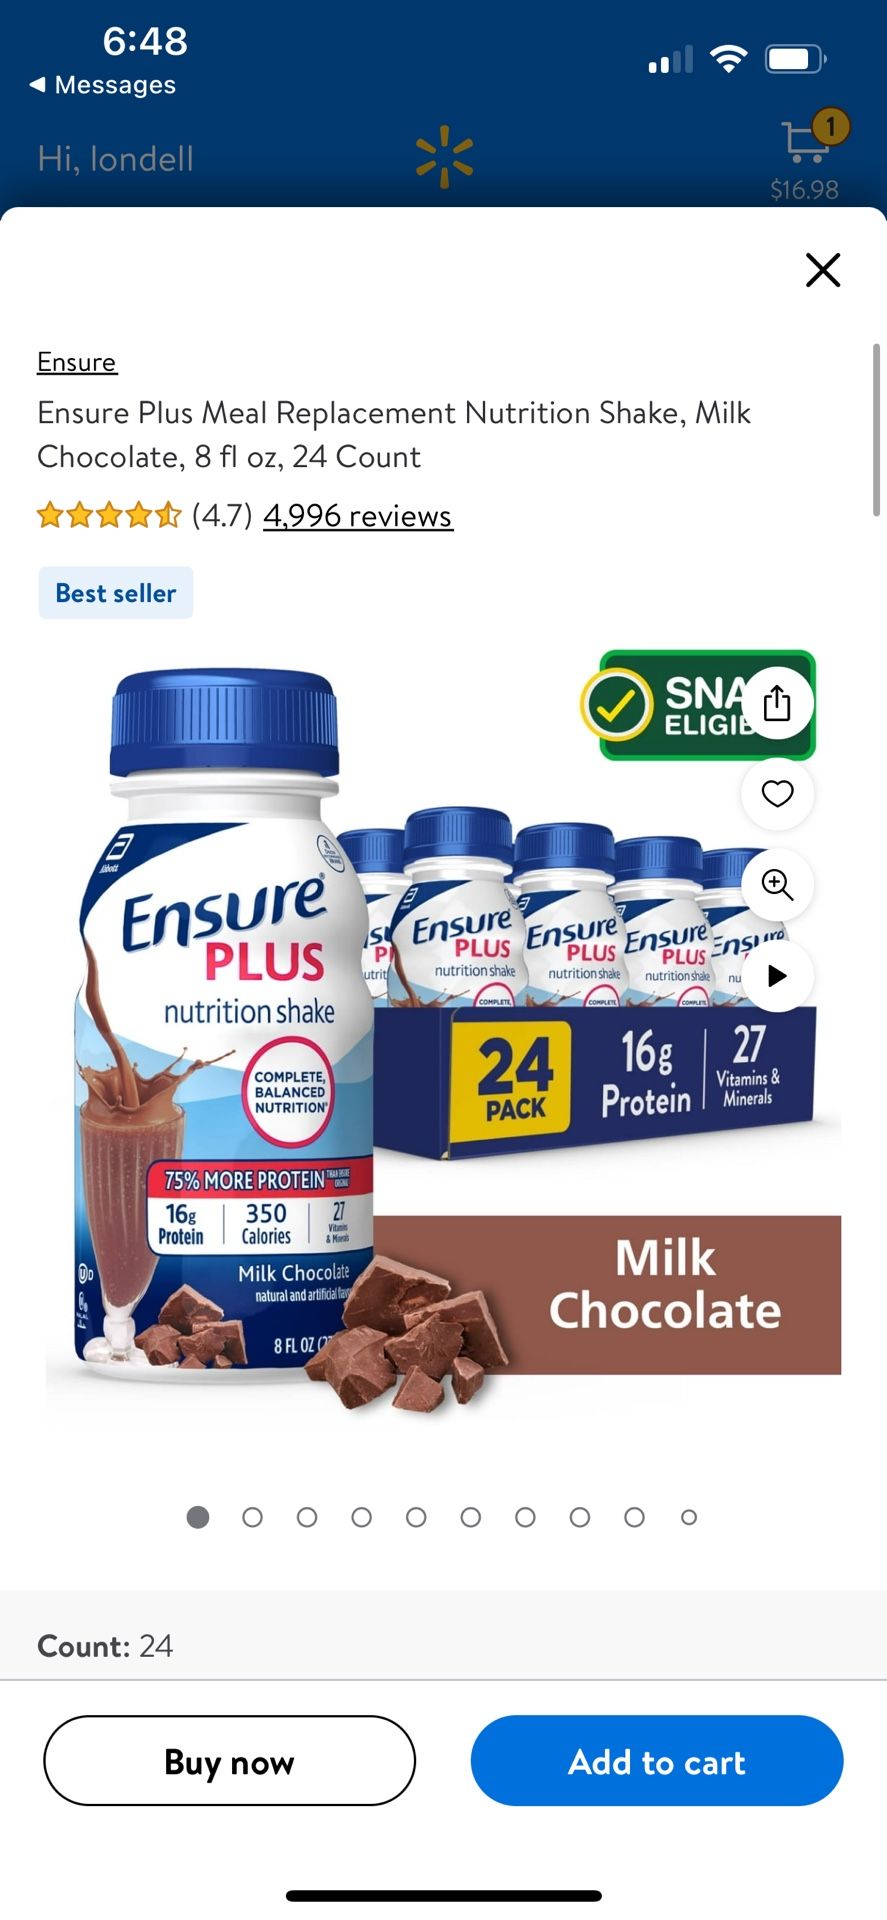 Ensure Plus Meal Replacement Nutrition Shake, Milk Chocolate, 8 fl oz, 24 Count